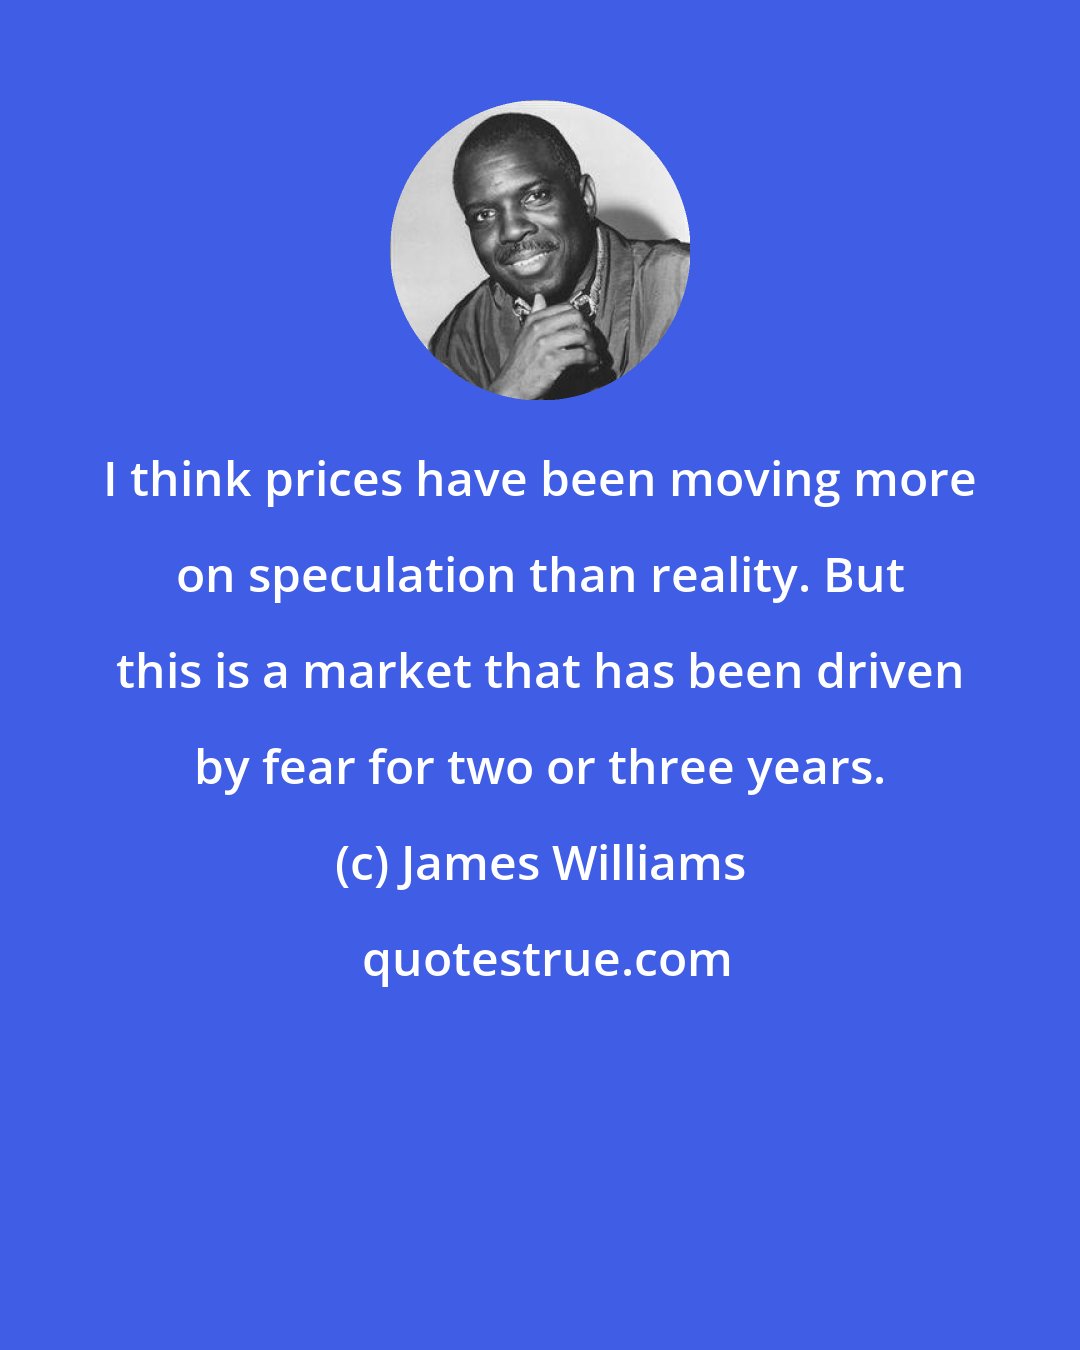 James Williams: I think prices have been moving more on speculation than reality. But this is a market that has been driven by fear for two or three years.